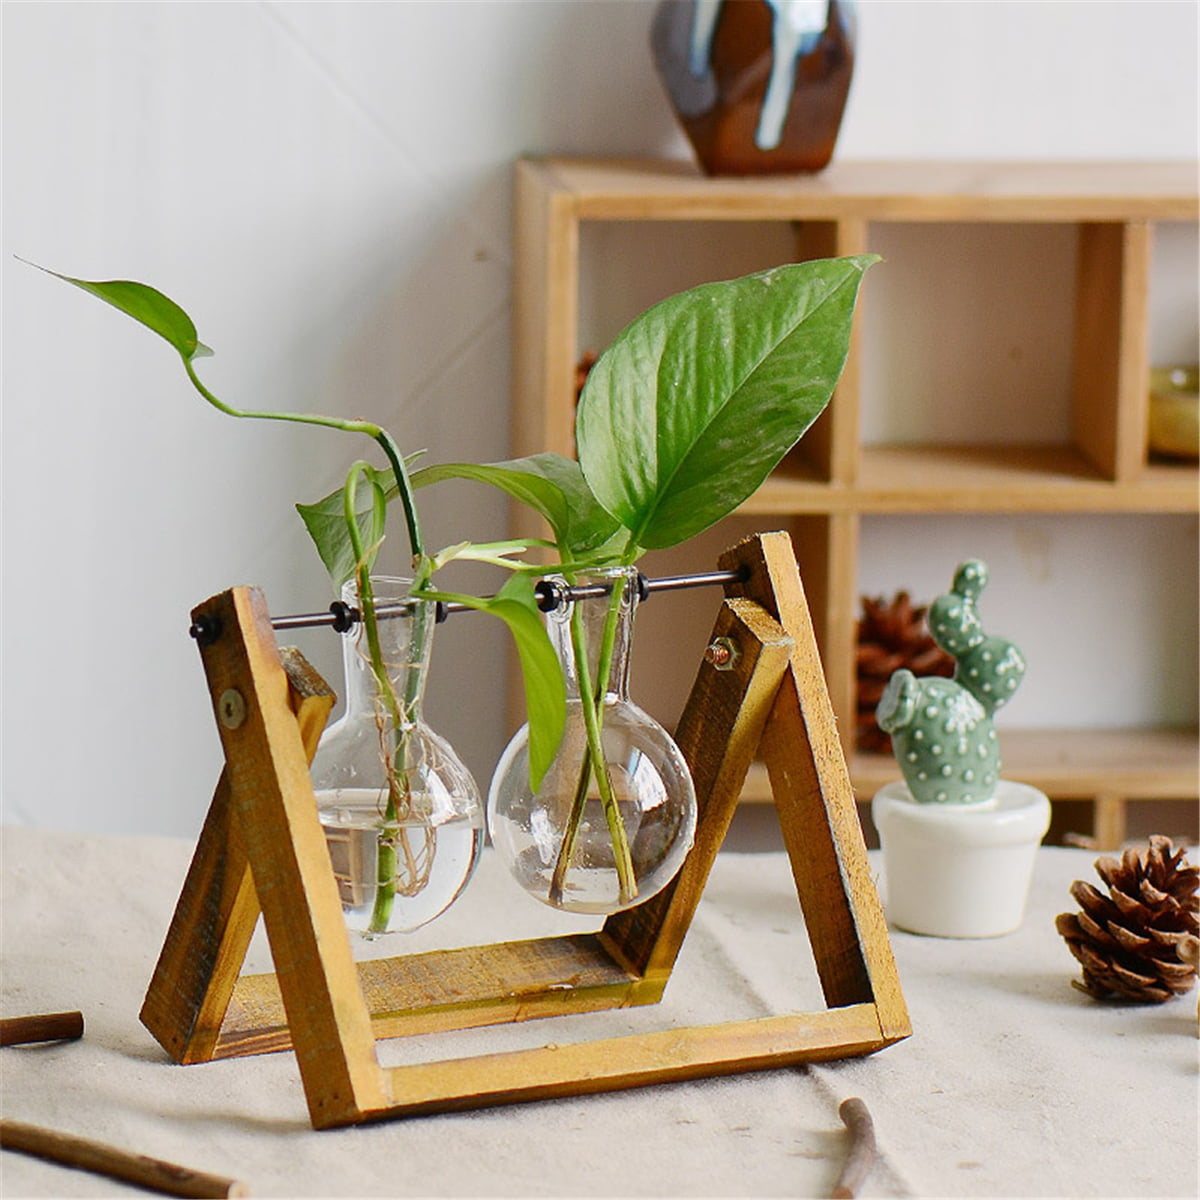 Bulb Glass Planter Vase Terrarium Flower Plant Container With Wooden Stand 3E9A